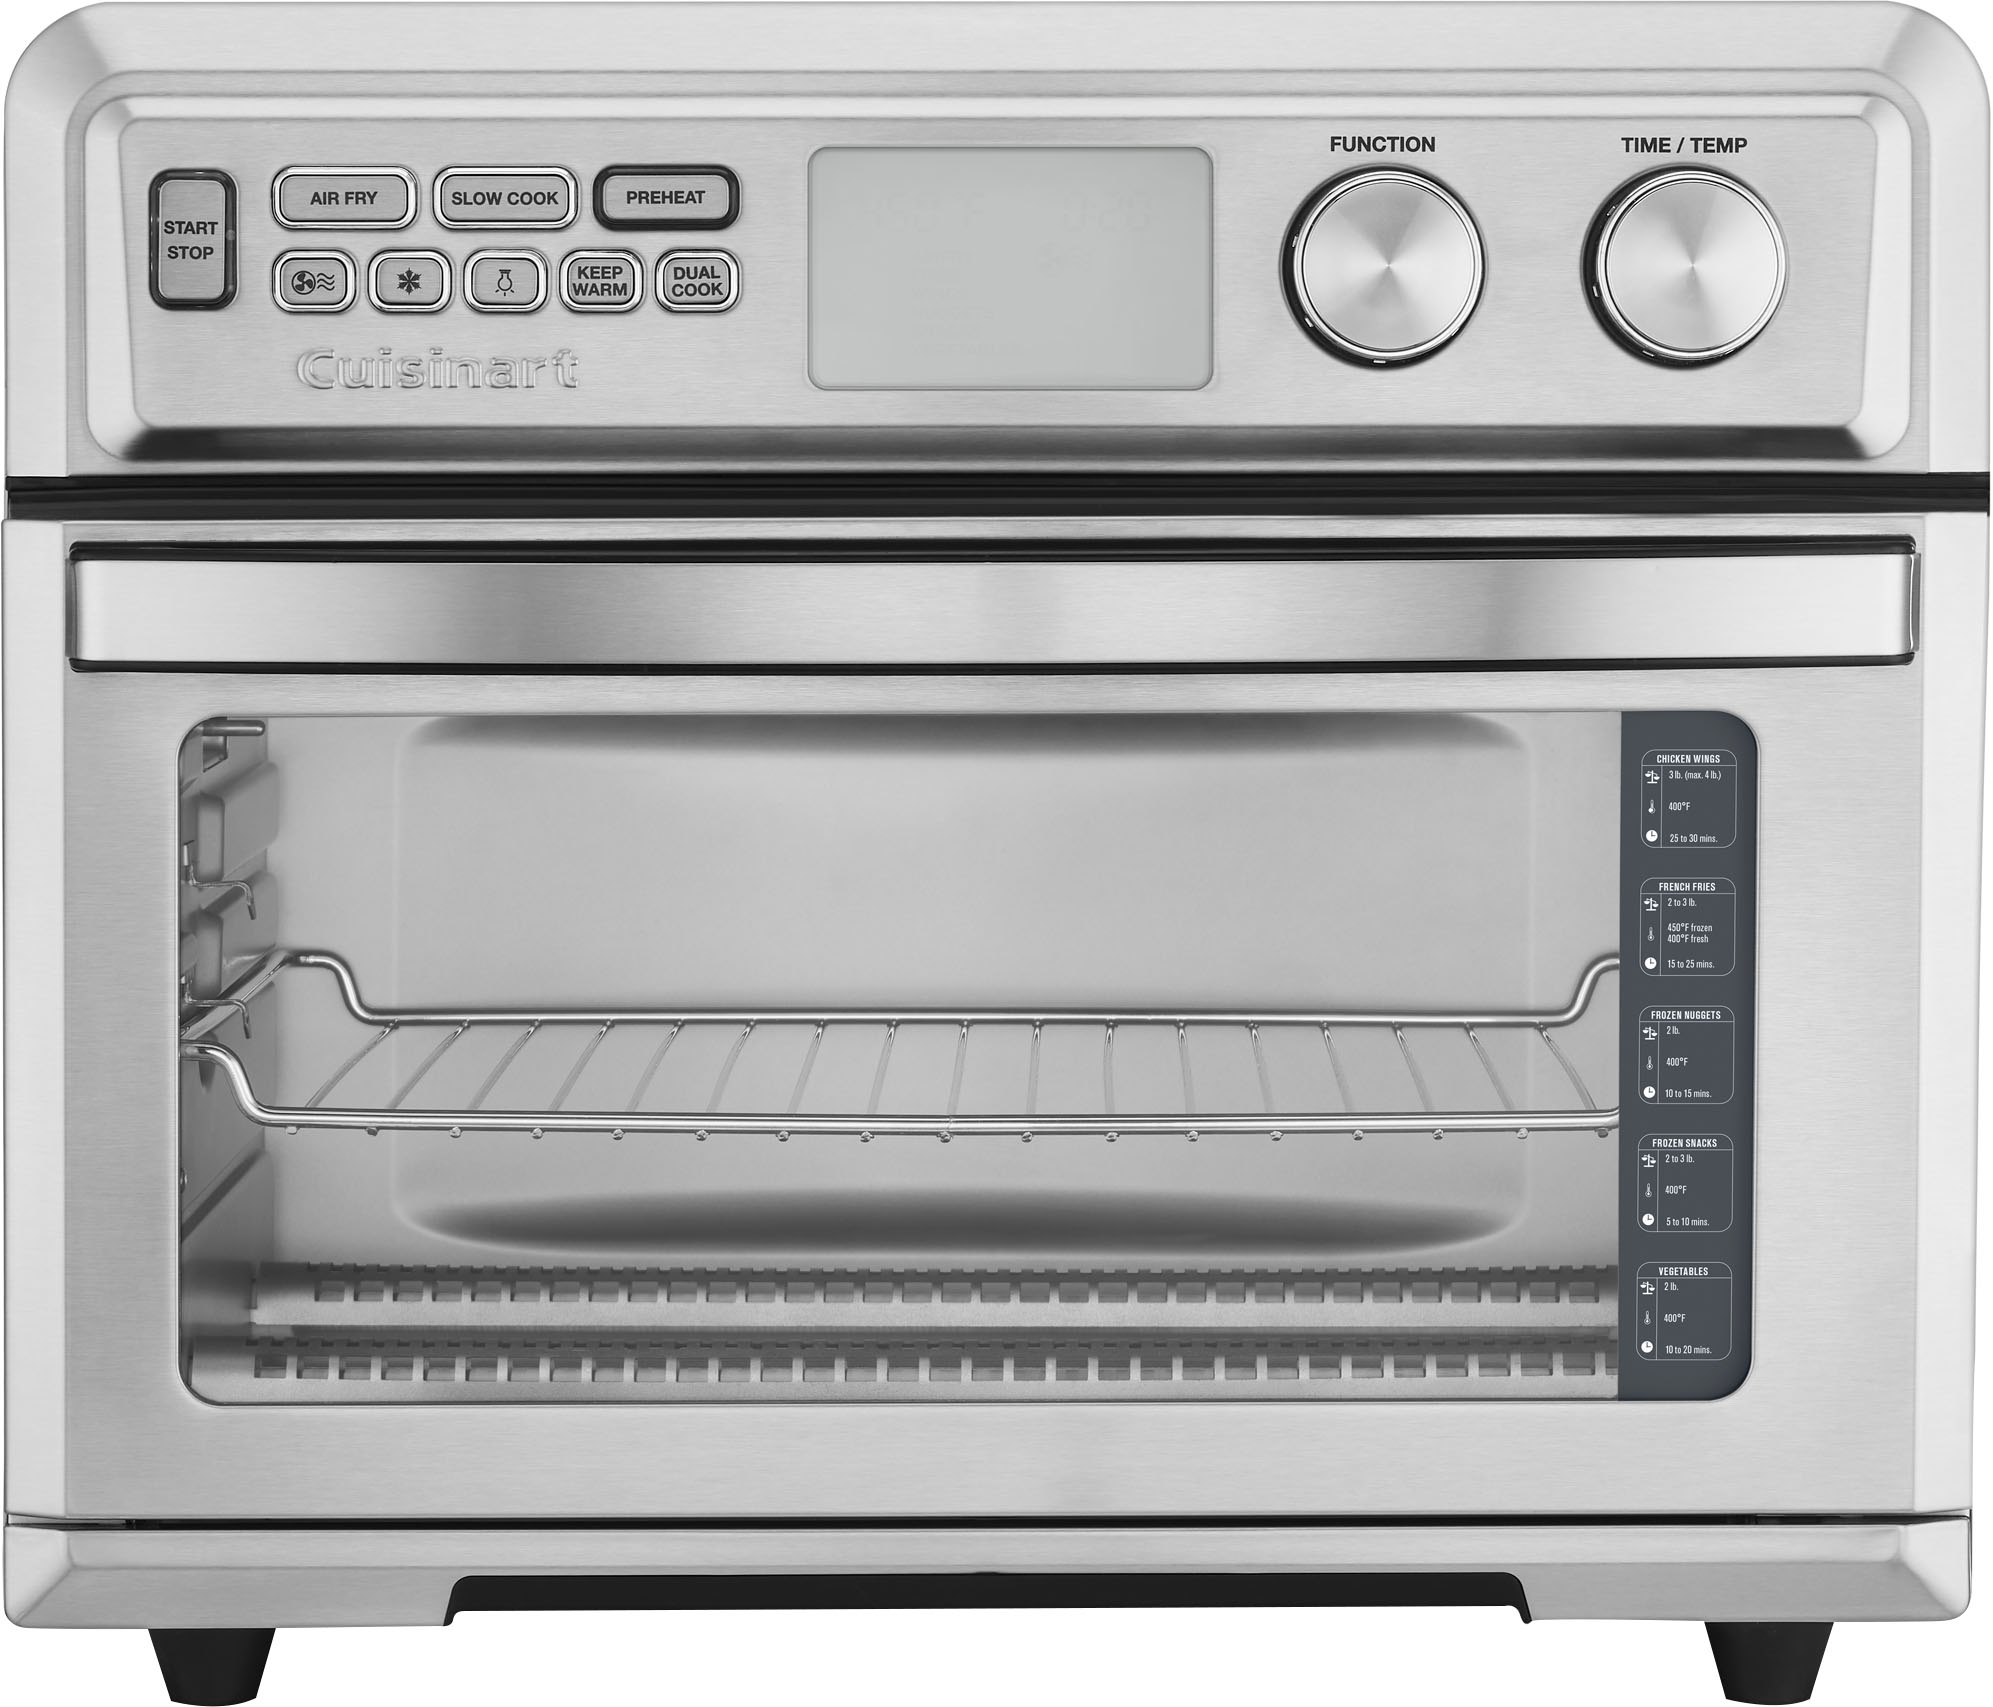 Cuisinart - Large AirFryer Toaster Oven - Stainless Steel